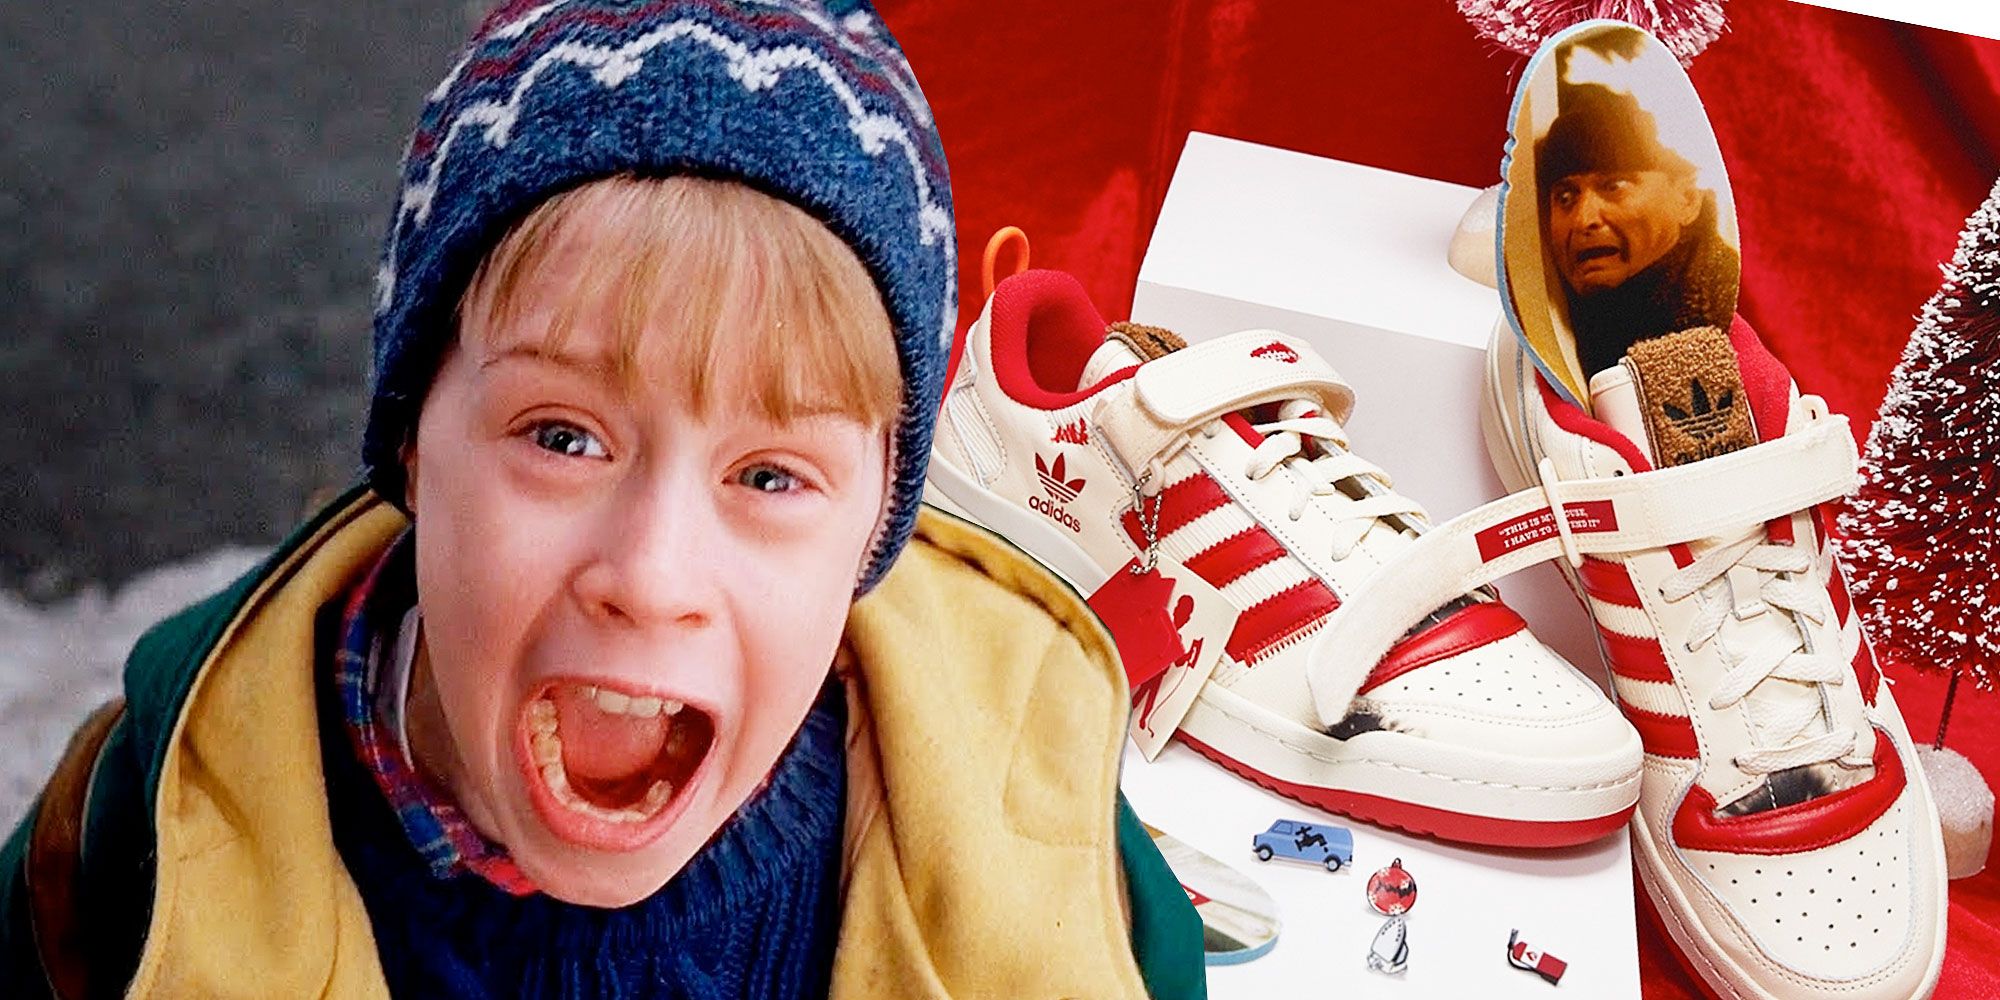 Adidas Releasing Home Alone Sneakers With Clever Nods To Original Movie